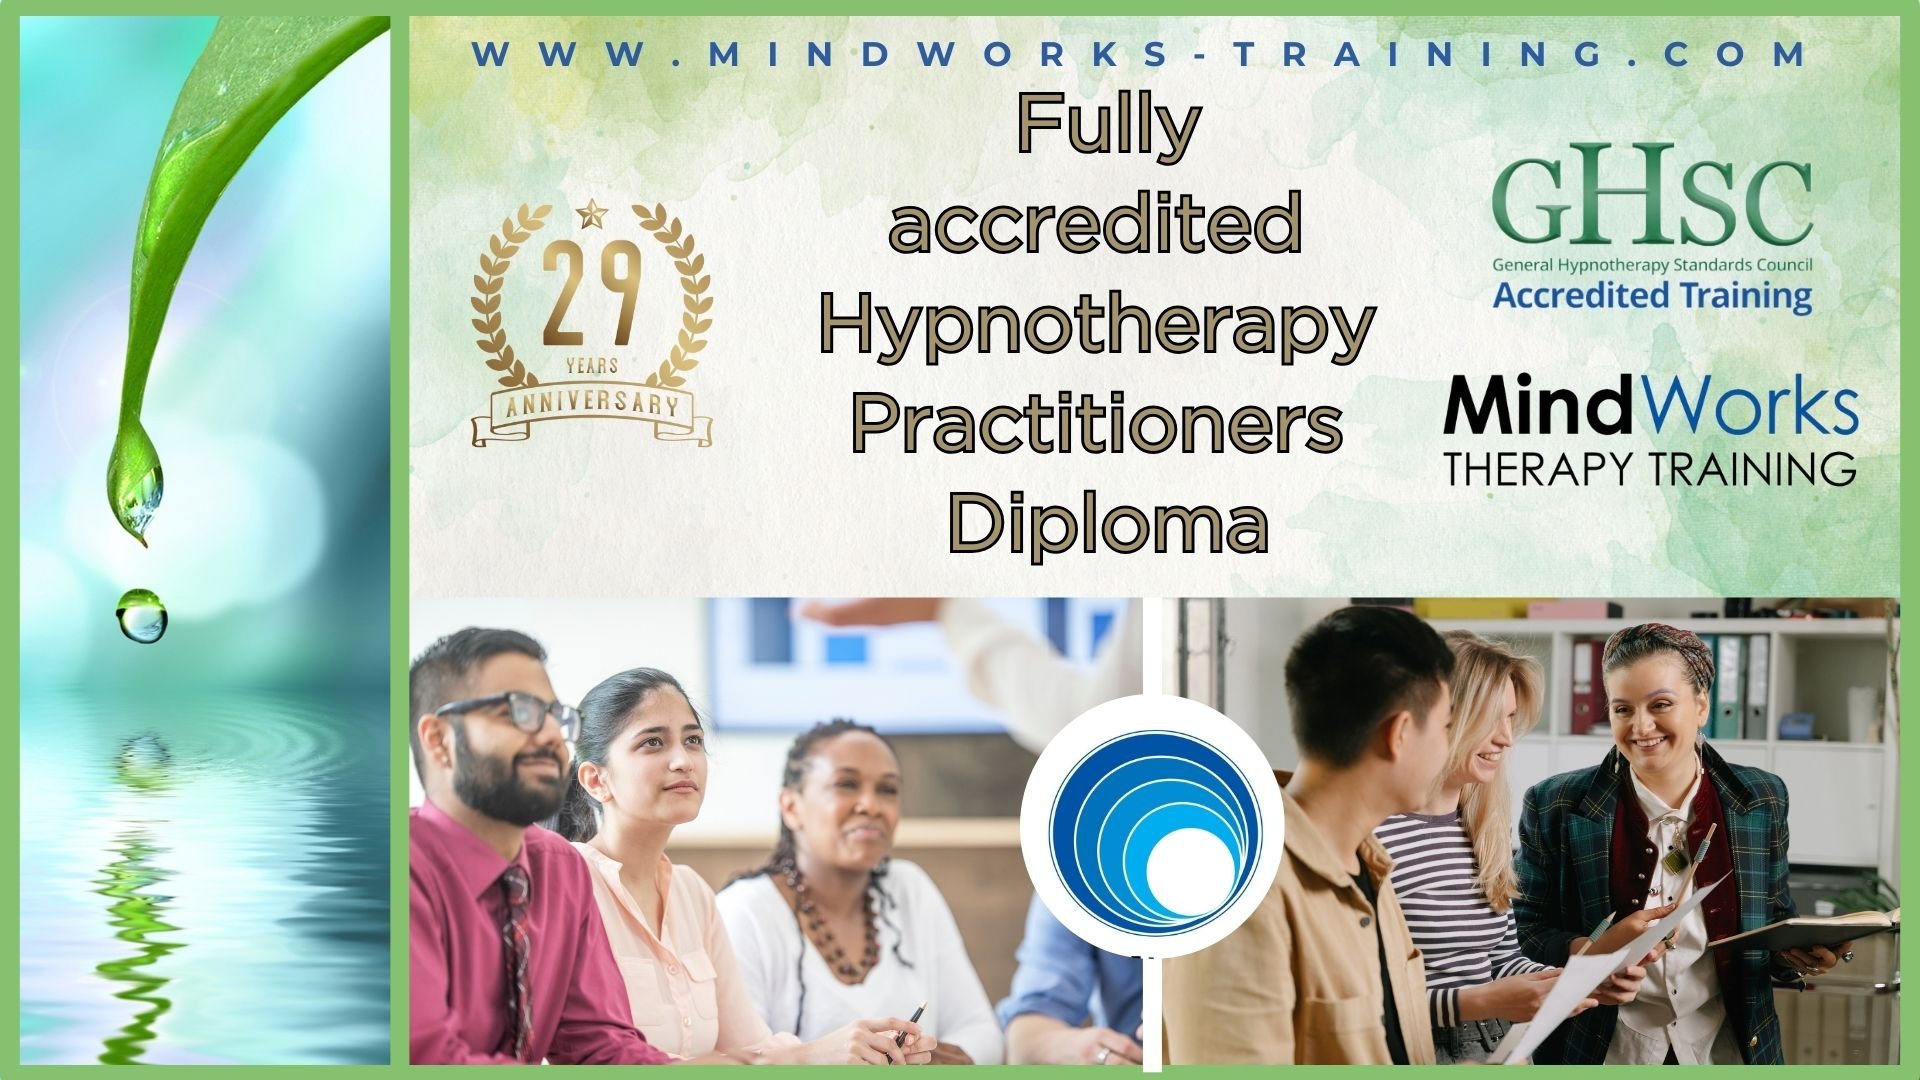 Practitioners Diploma in Hypnotherapy accredited by the GHSC nearly 30 years experience in providing cutting-edge tuition in hypnotherapy and other integrative therapies.